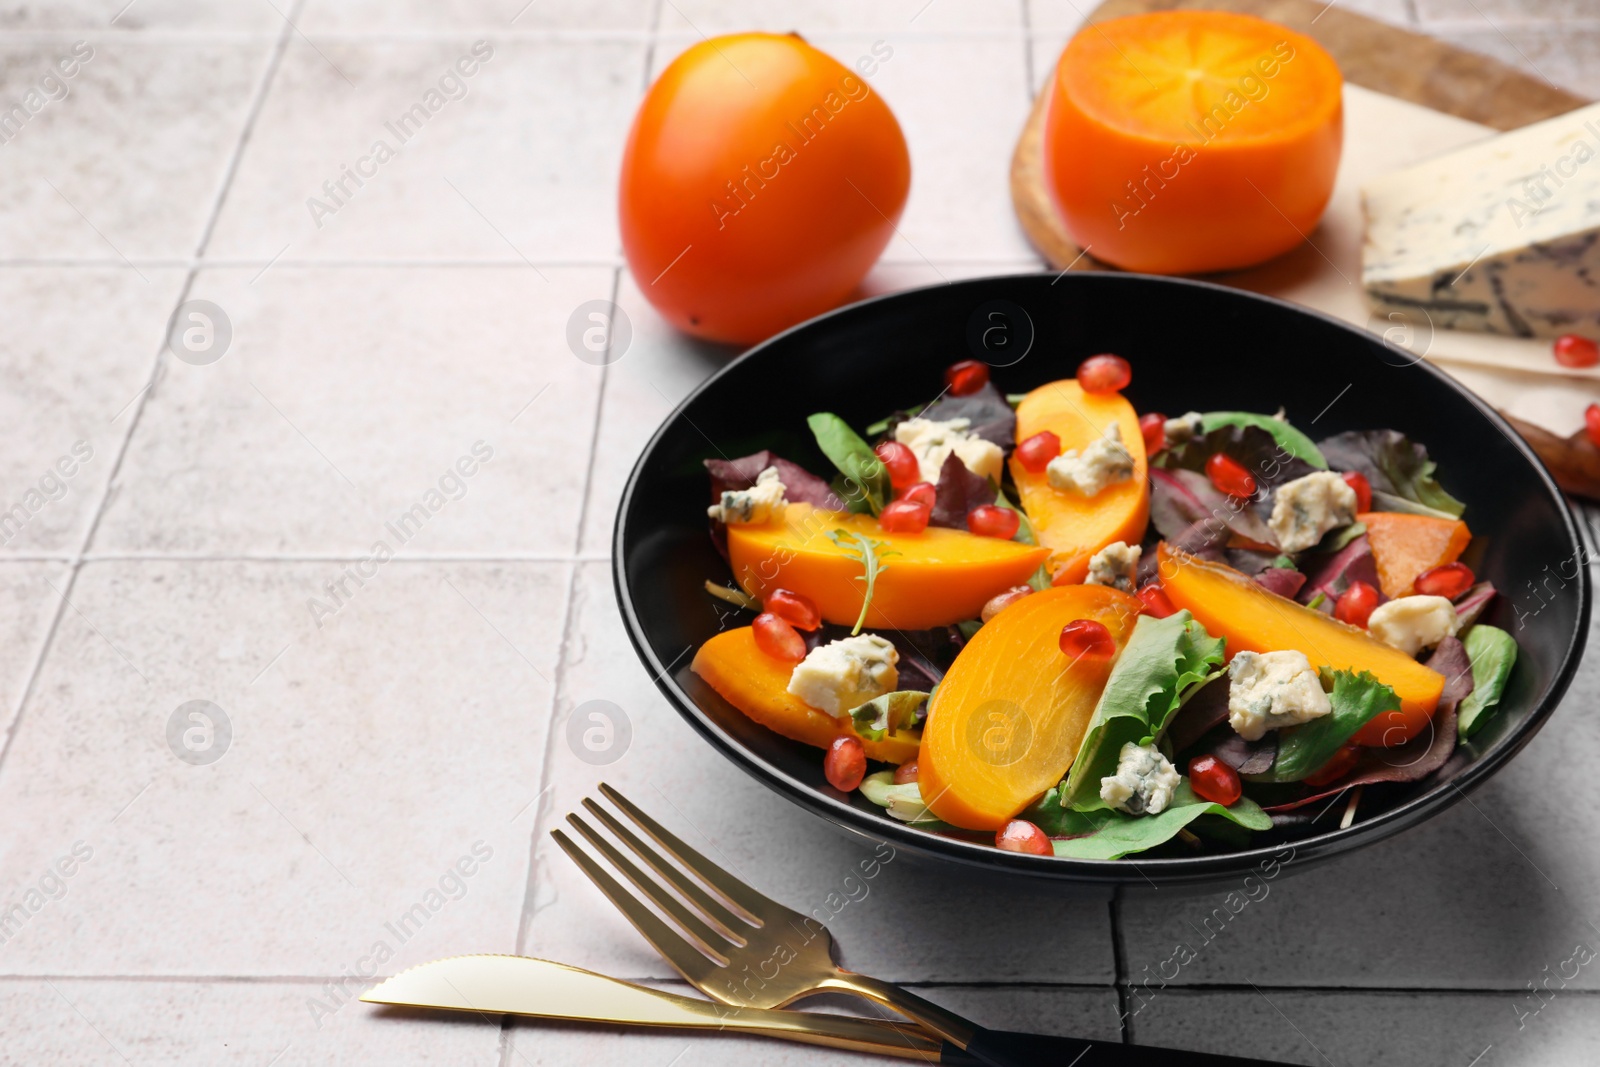 Photo of Delicious persimmon salad, knife and fork on tiled surface, space for text